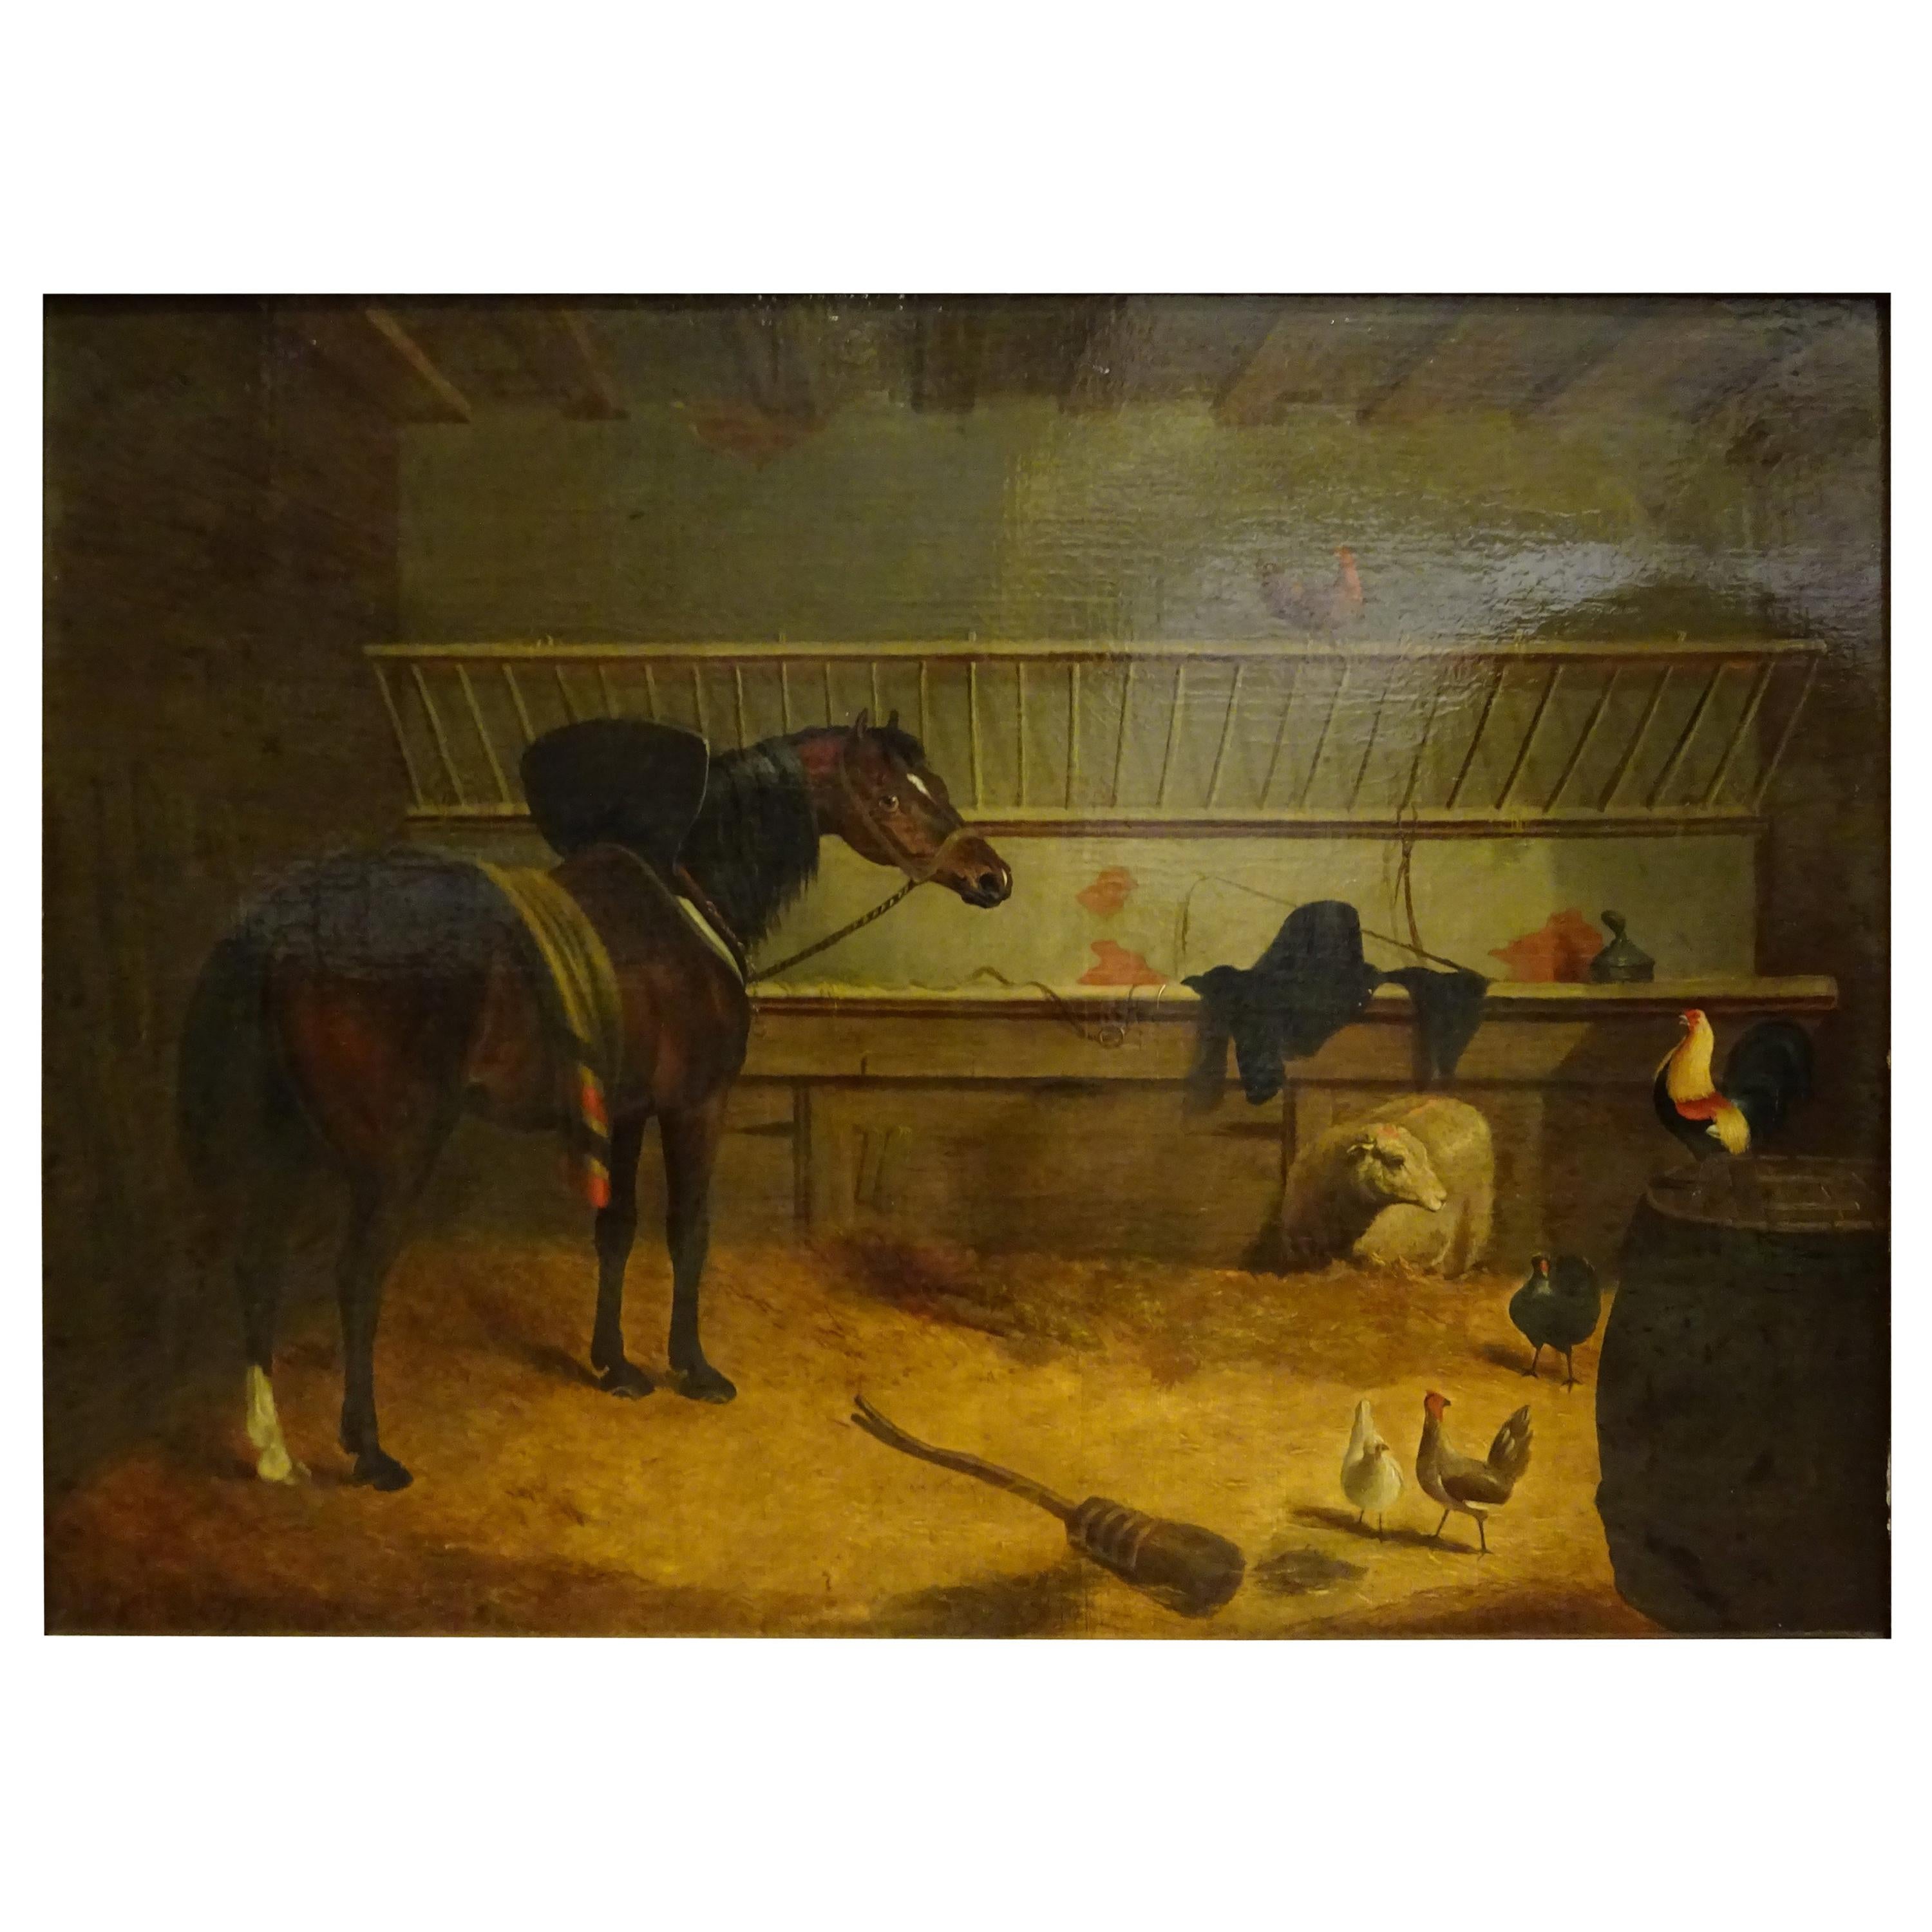 1840 Jhon Frederick Herring Sr  Oil on Canvas "Stable with Horse" EnglandSigned